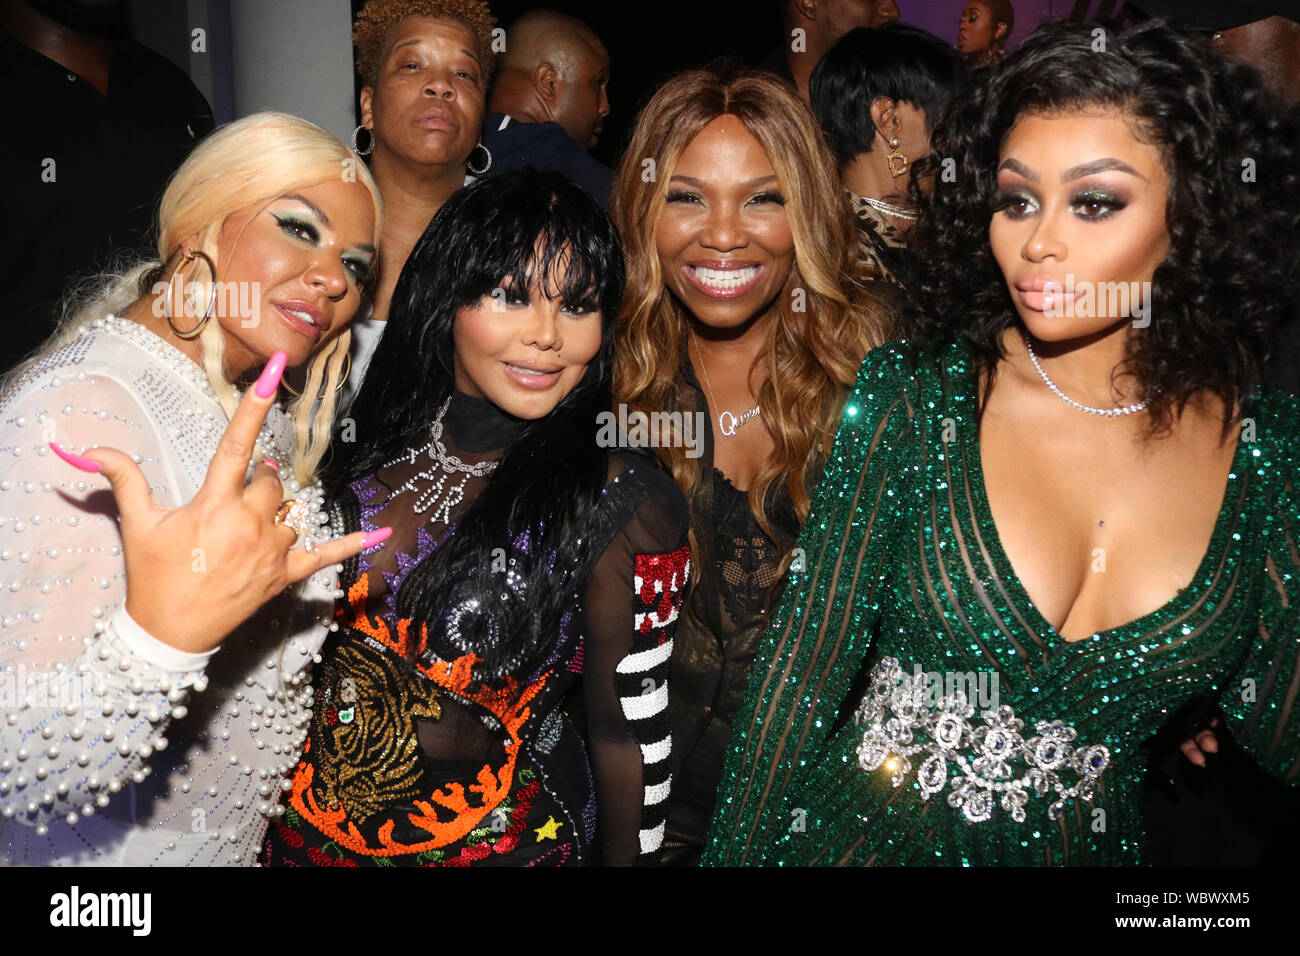 New York, NY, USA. 26th Aug, 2019. Madina Milana, Lil Kim, Mona Scott and Black Chyna at Missy Elliott's MTV Video Music Awards after party at the Missy Museum in New York City on August 26, 2019. Credit: Walik Goshorn/Media Punch/Alamy Live News Stock Photo